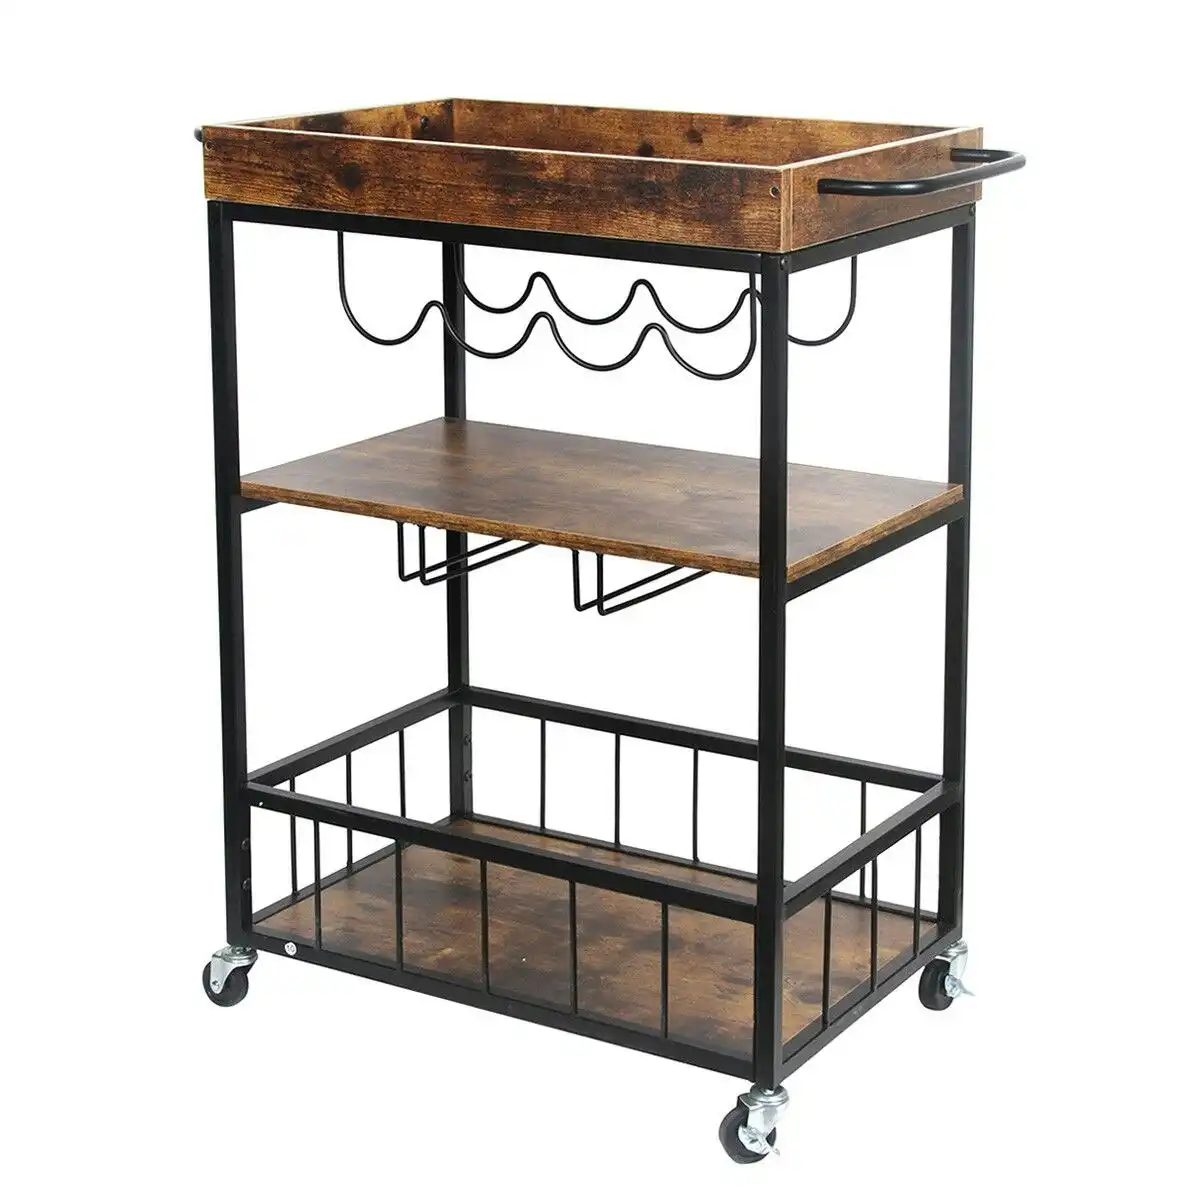 Ausway Rolling Bar Cart Mobile Drinks Coffee Tea Serving Trolley Wine Rack Glass Holder Removable Top Tray Brown